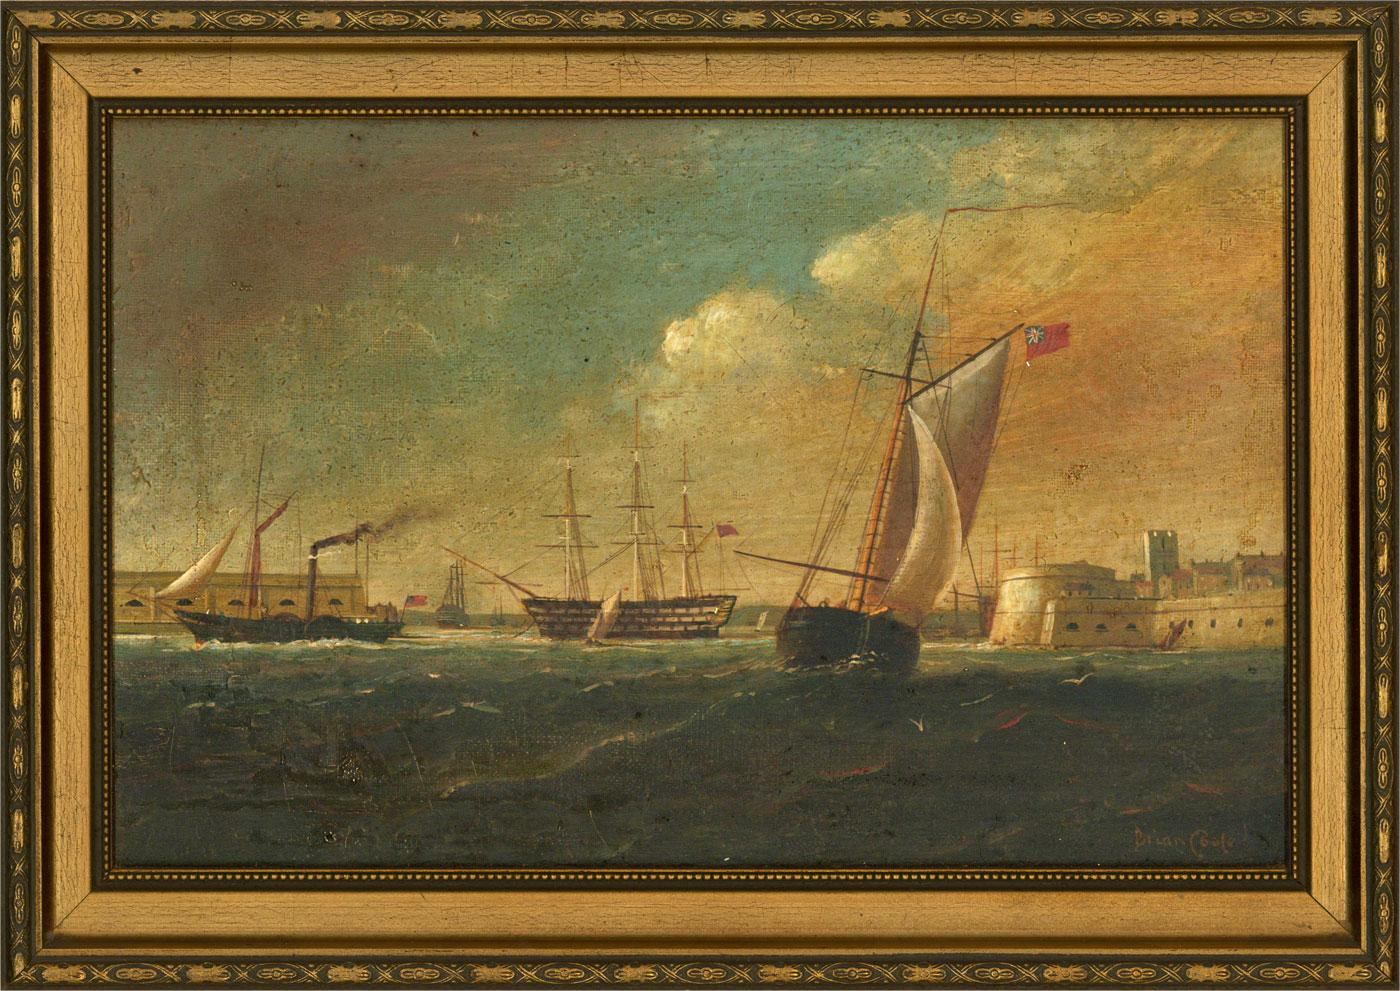 A finely rendered oil by the nautical artist Brian Coole. The scene shows various vessels entering and leaving Portsmouth harbor including a merchant navy vessel (identifiable by its red ensign flag), an American paddle steamer and a warship with